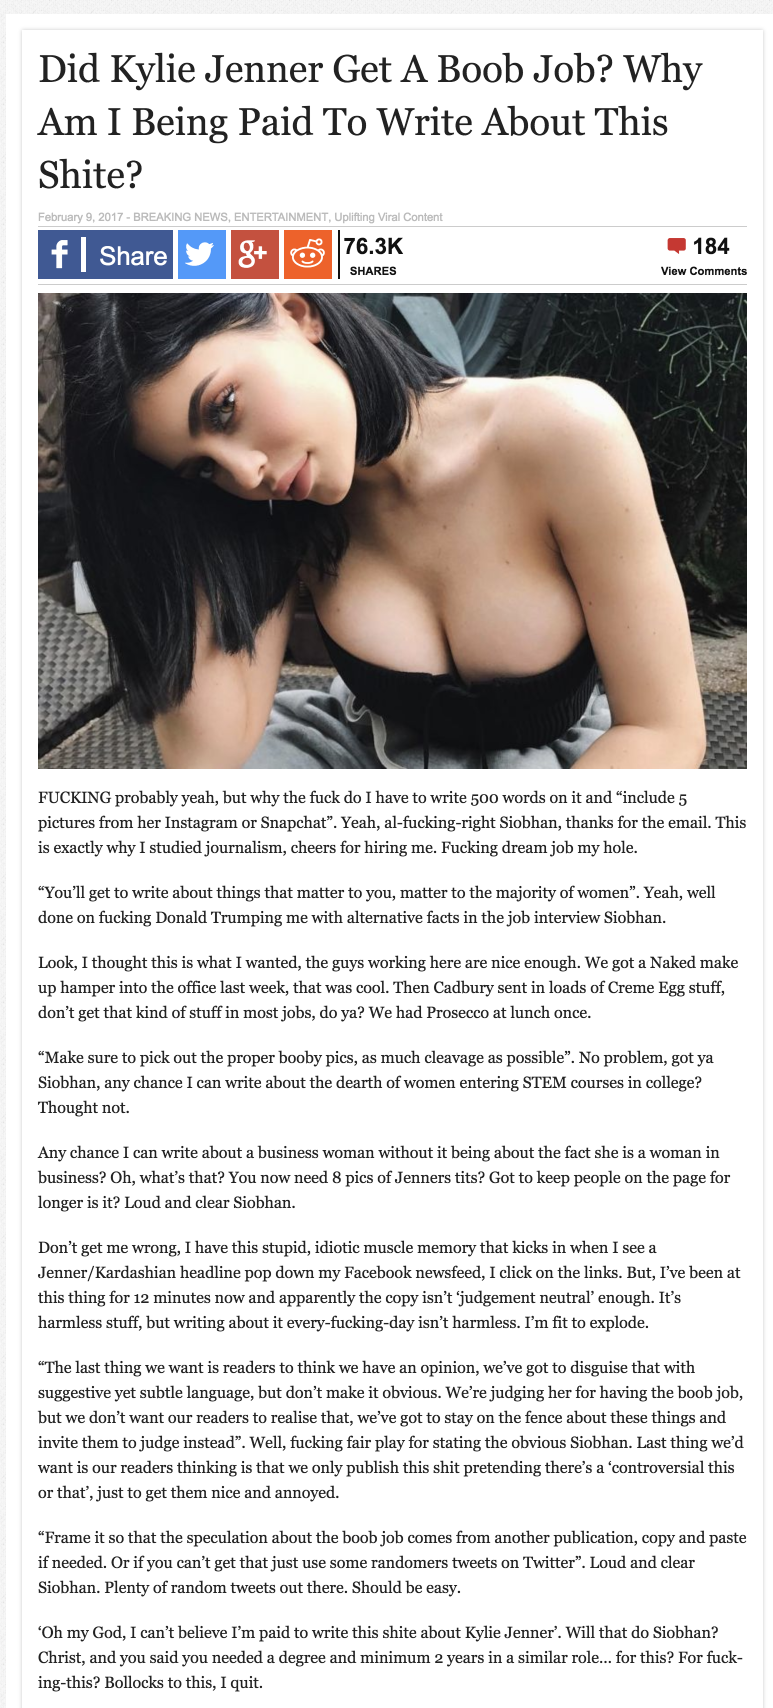 Did Kylie Jenner get a Boob Job? Who cares?! I quit!